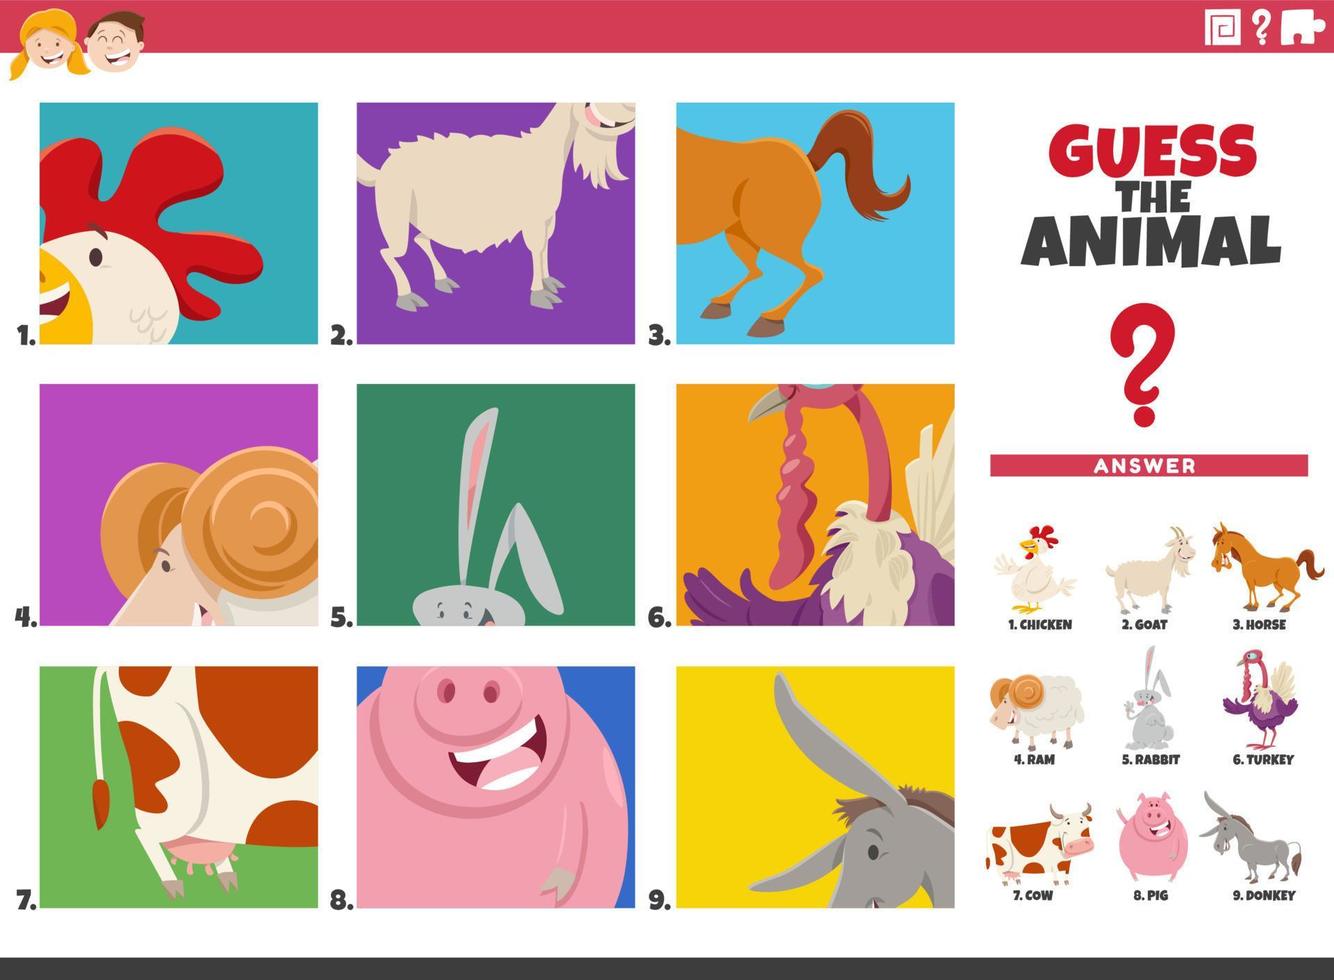 guess cartoon animal characters educational game for kids vector